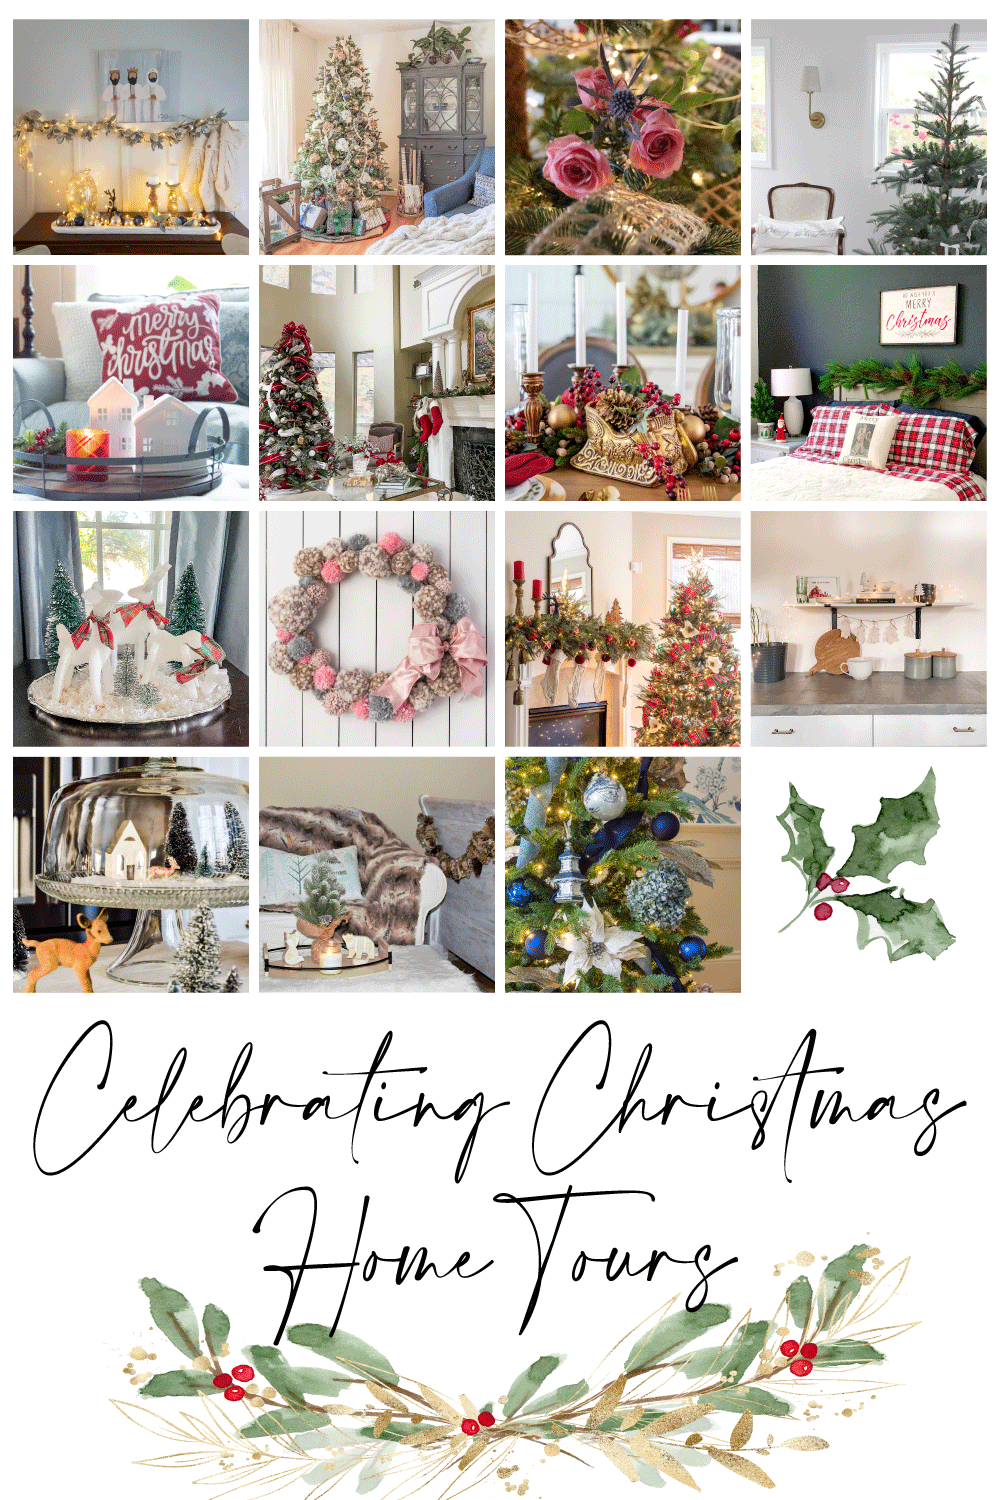 A french country Christmas home tour